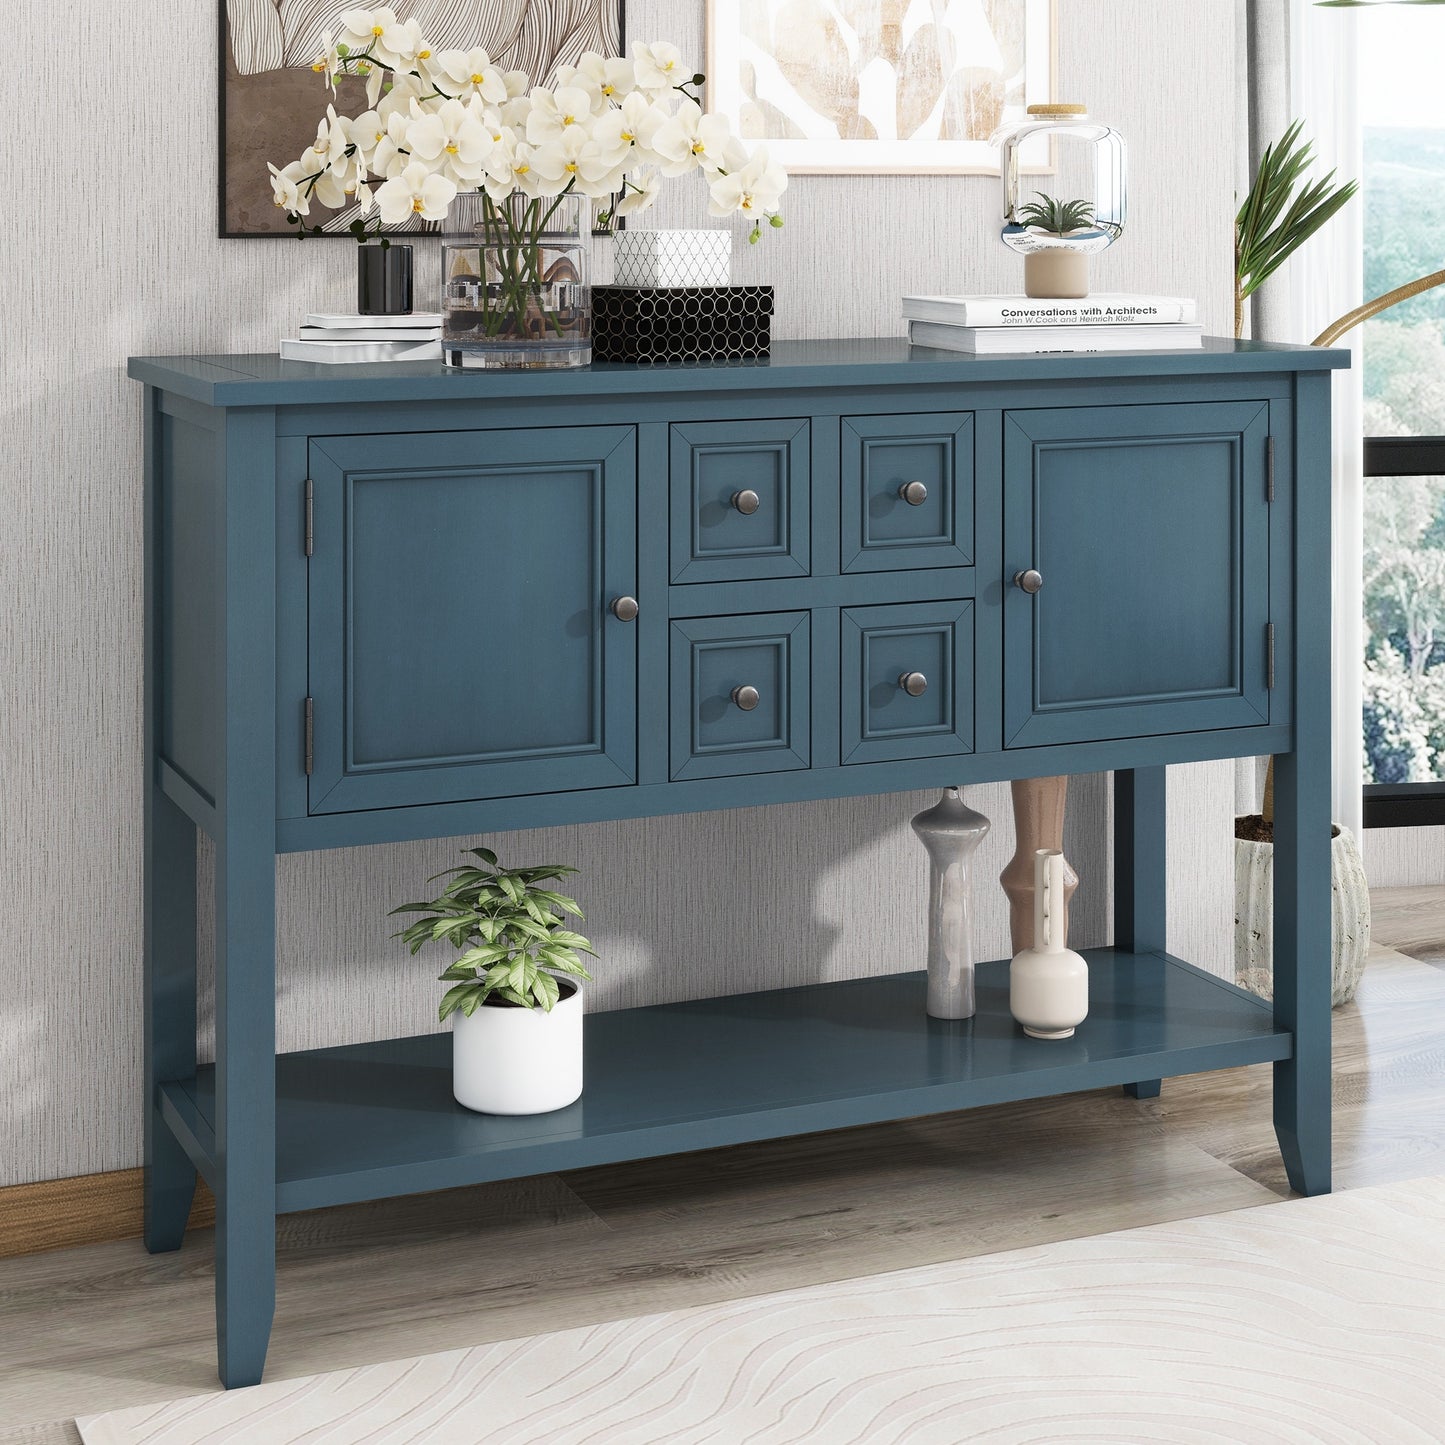 TREXM Cambridge Series Ample Storage Vintage Console Table with Four Small Drawers and Bottom Shelf for Living Rooms, Entrances and Kitchens (Light Navy, OLD SKU: WF190263AAH)